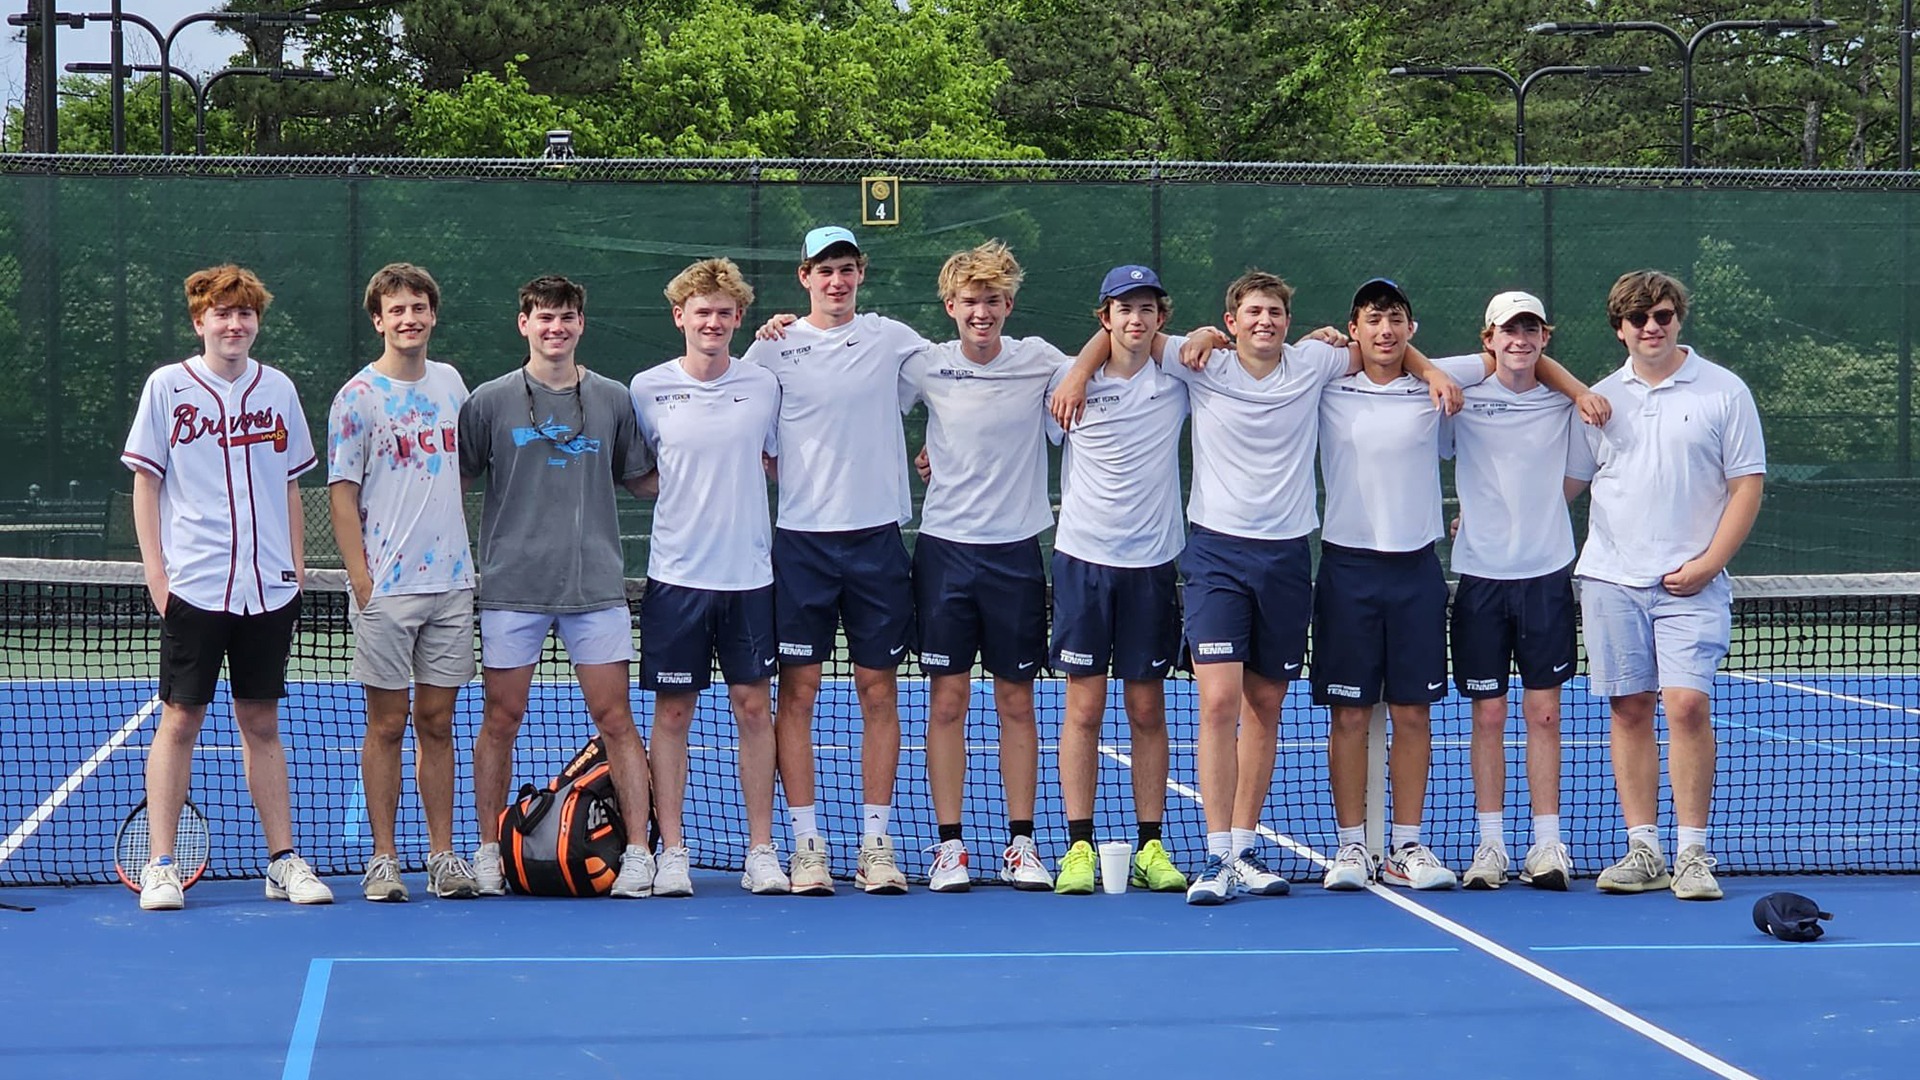 BOYS TENNIS RETURNS TO STATE CHAMPIONSHIP WITH 3-1 WIN OVER GALLOWAY